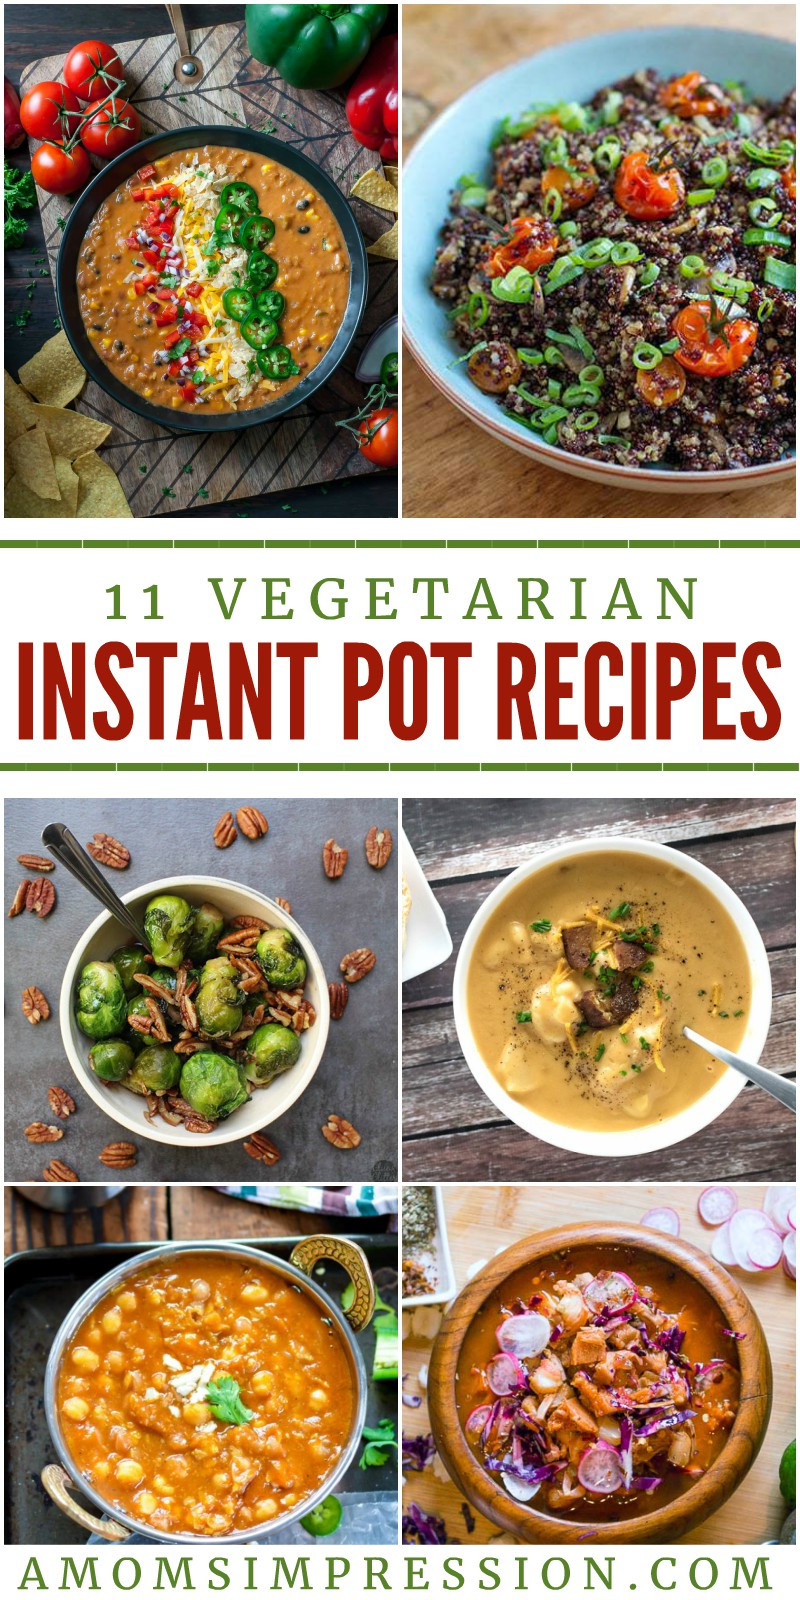 Vegetarian Recipes For Instant Pot
 11 Exciting Ve arian Instant Pot Recipes Everyone will Love